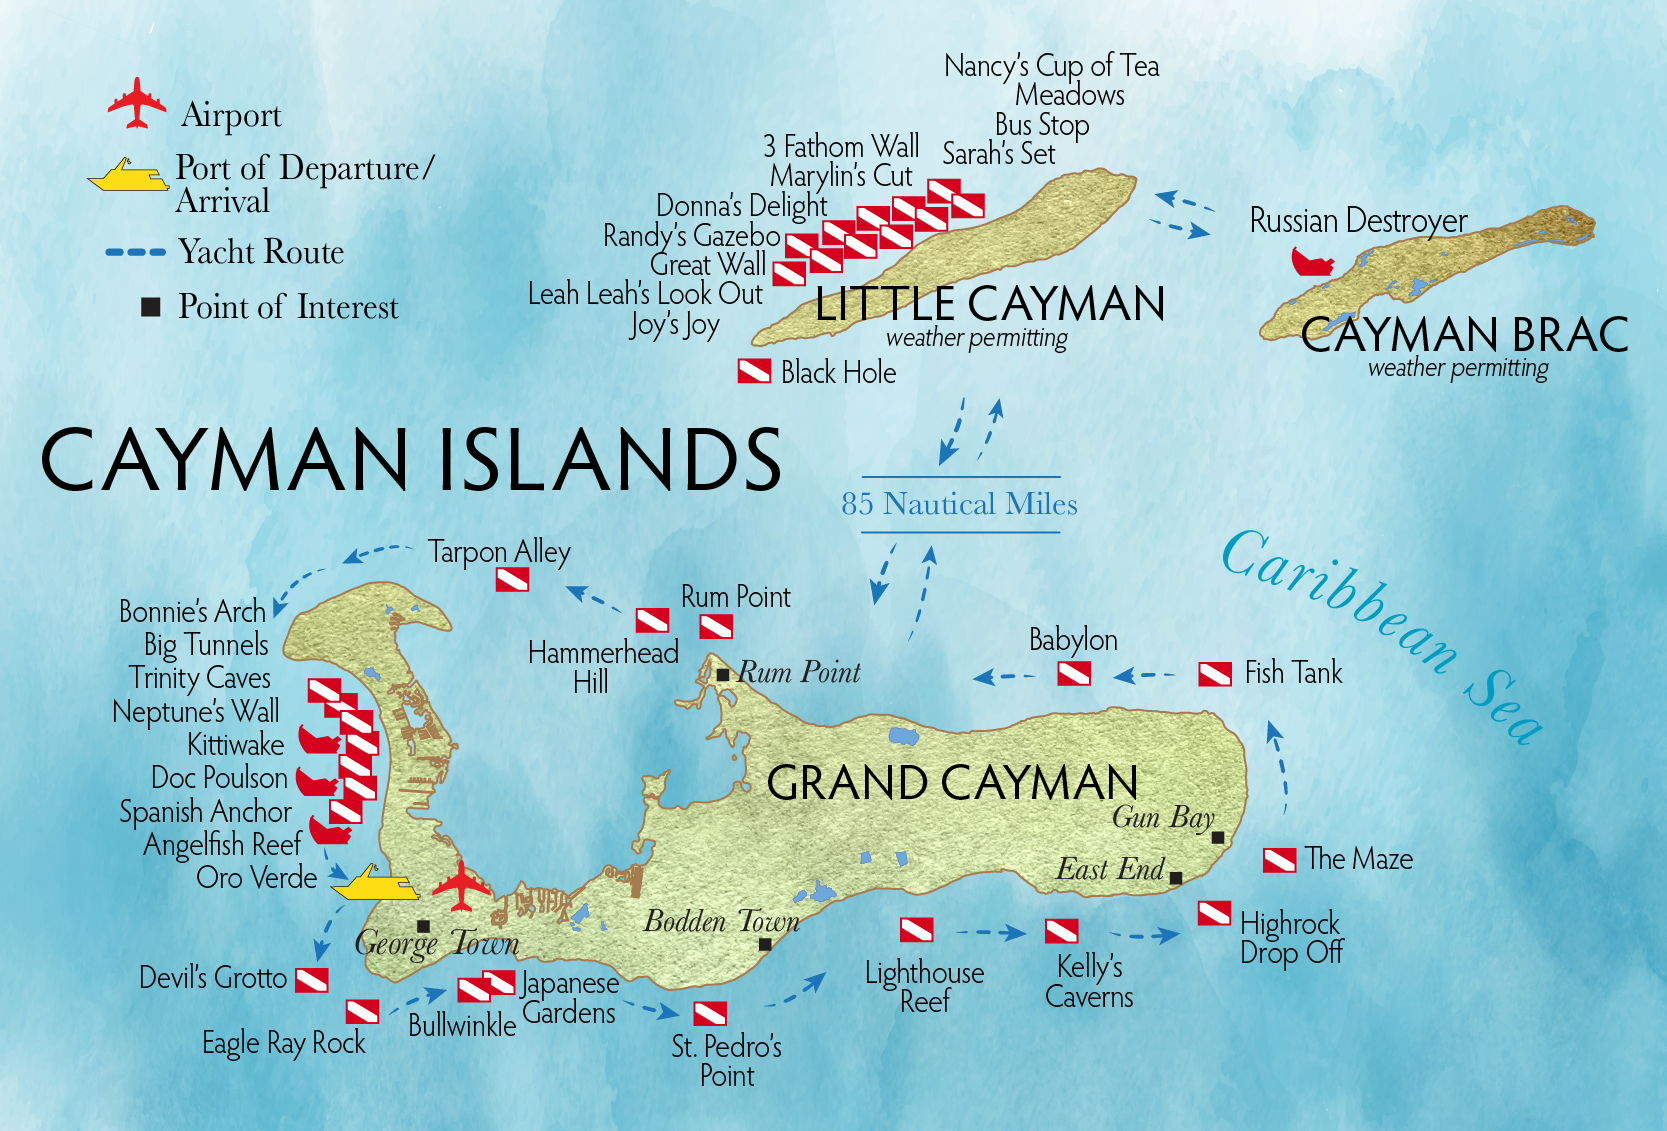 The itinerary of the trip shows several dive flags along the coasts of all three Cayman islands.